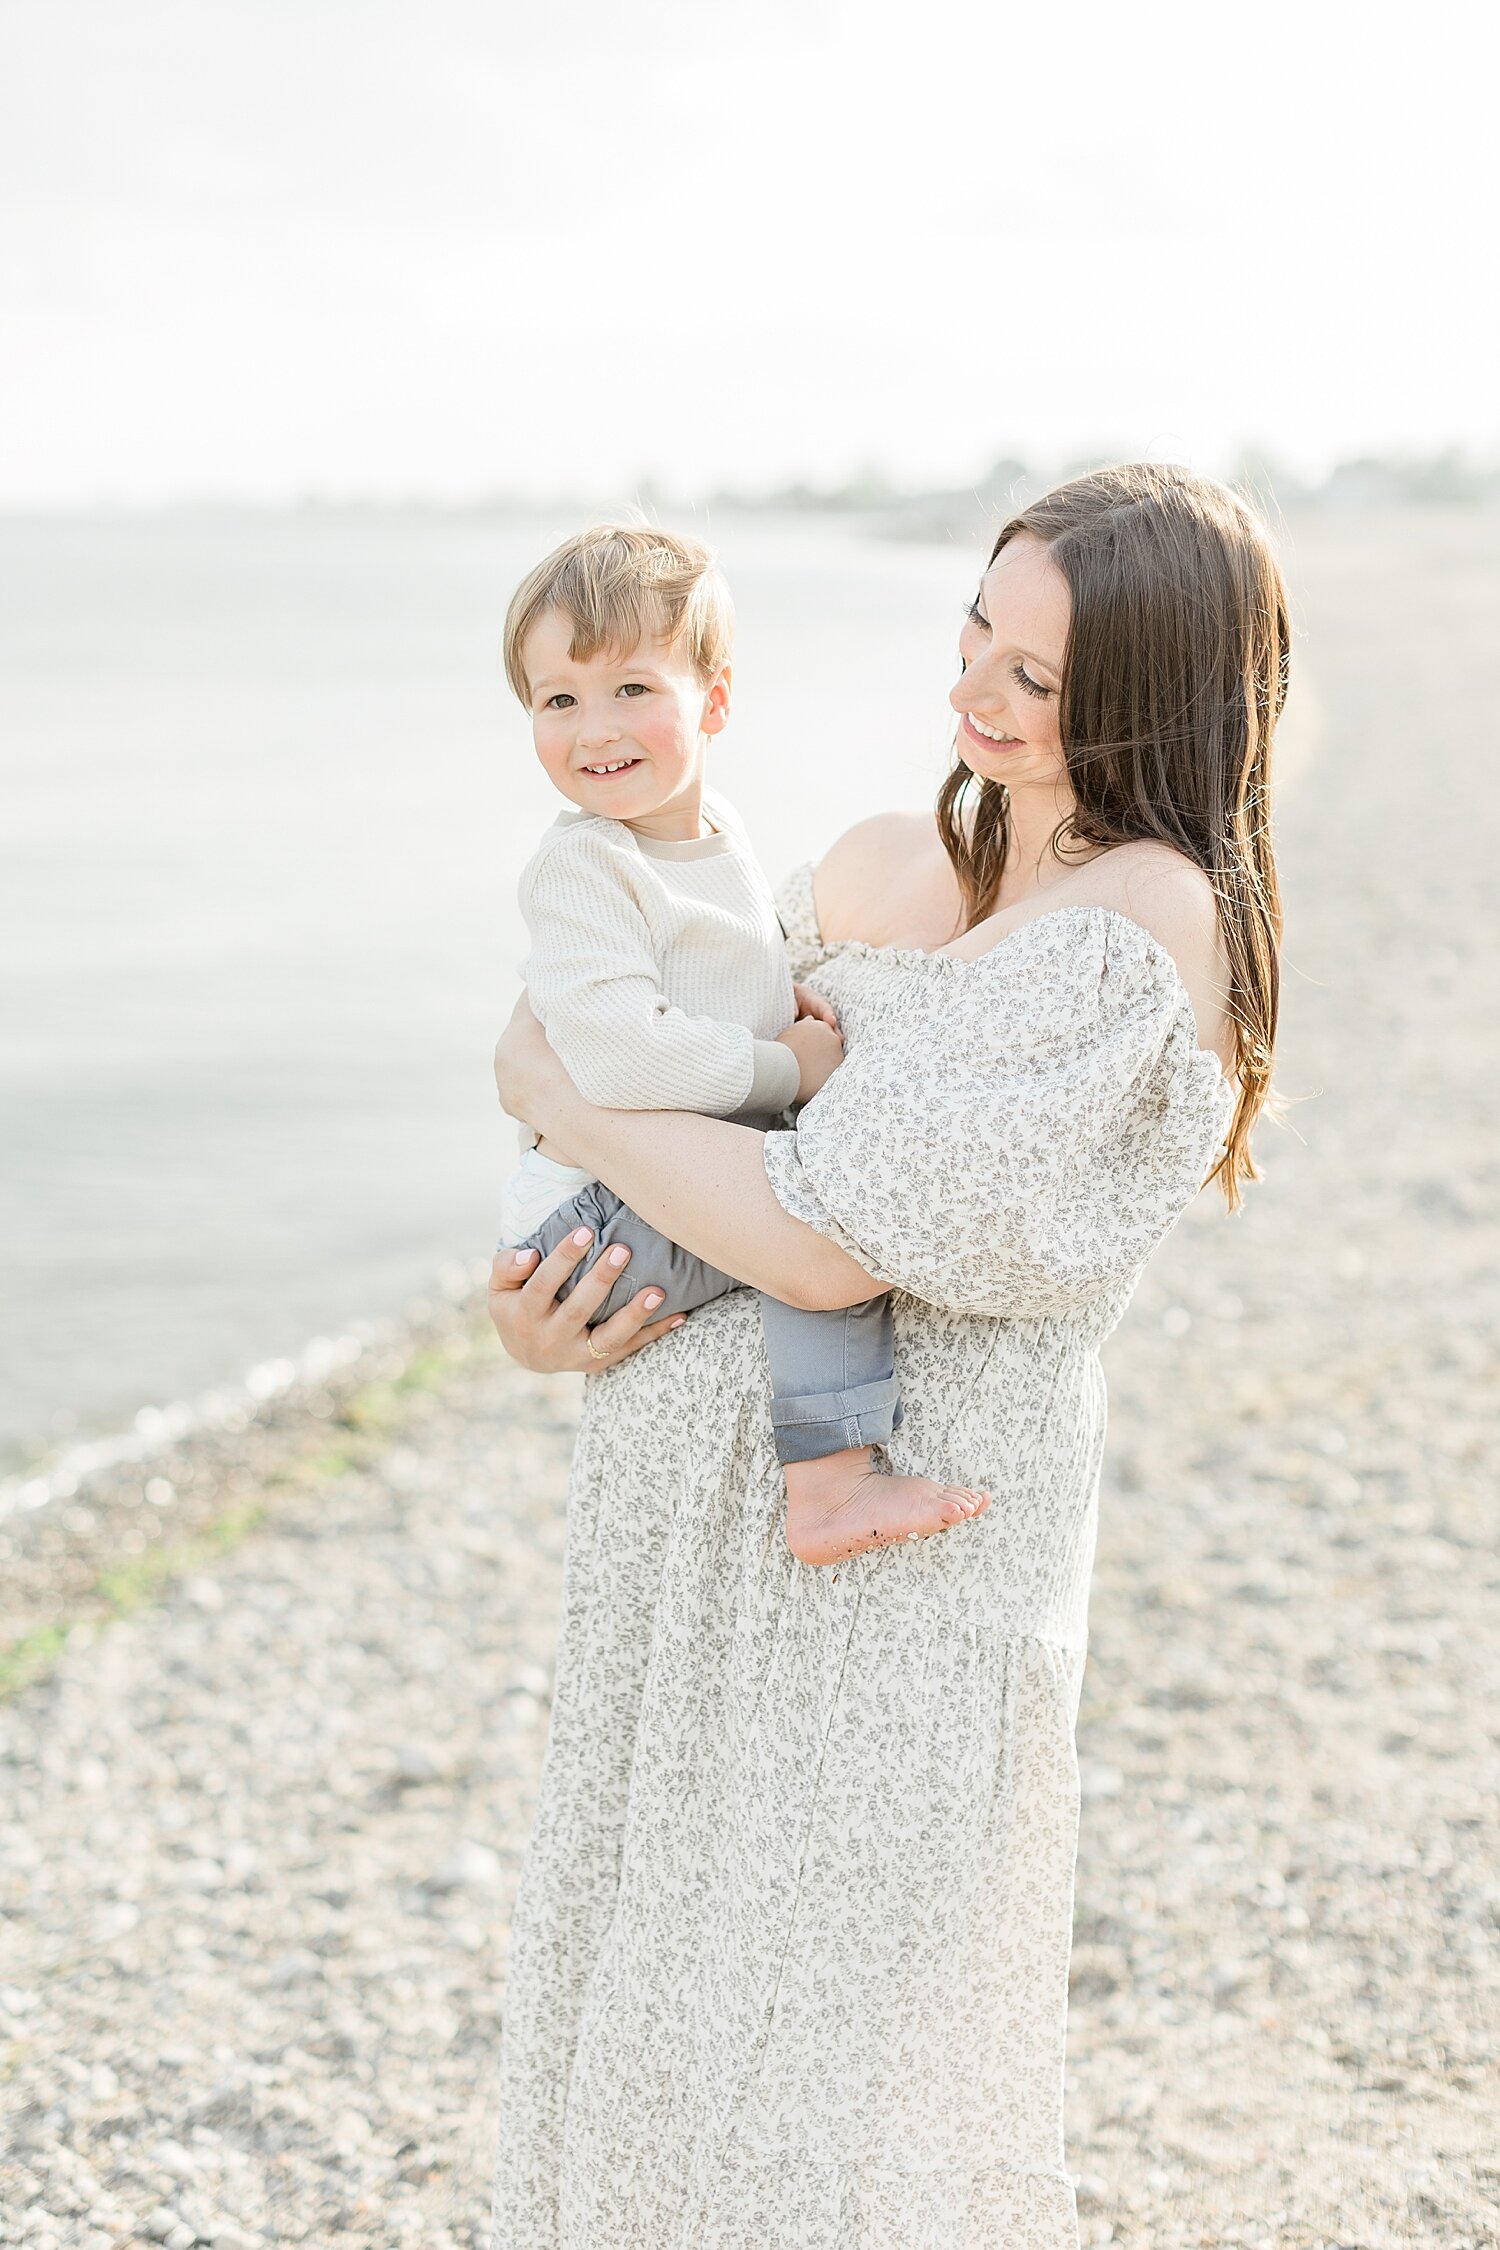 Mom holding her son during maternity session with baby #2. Photo by Kristin Wood Photography.